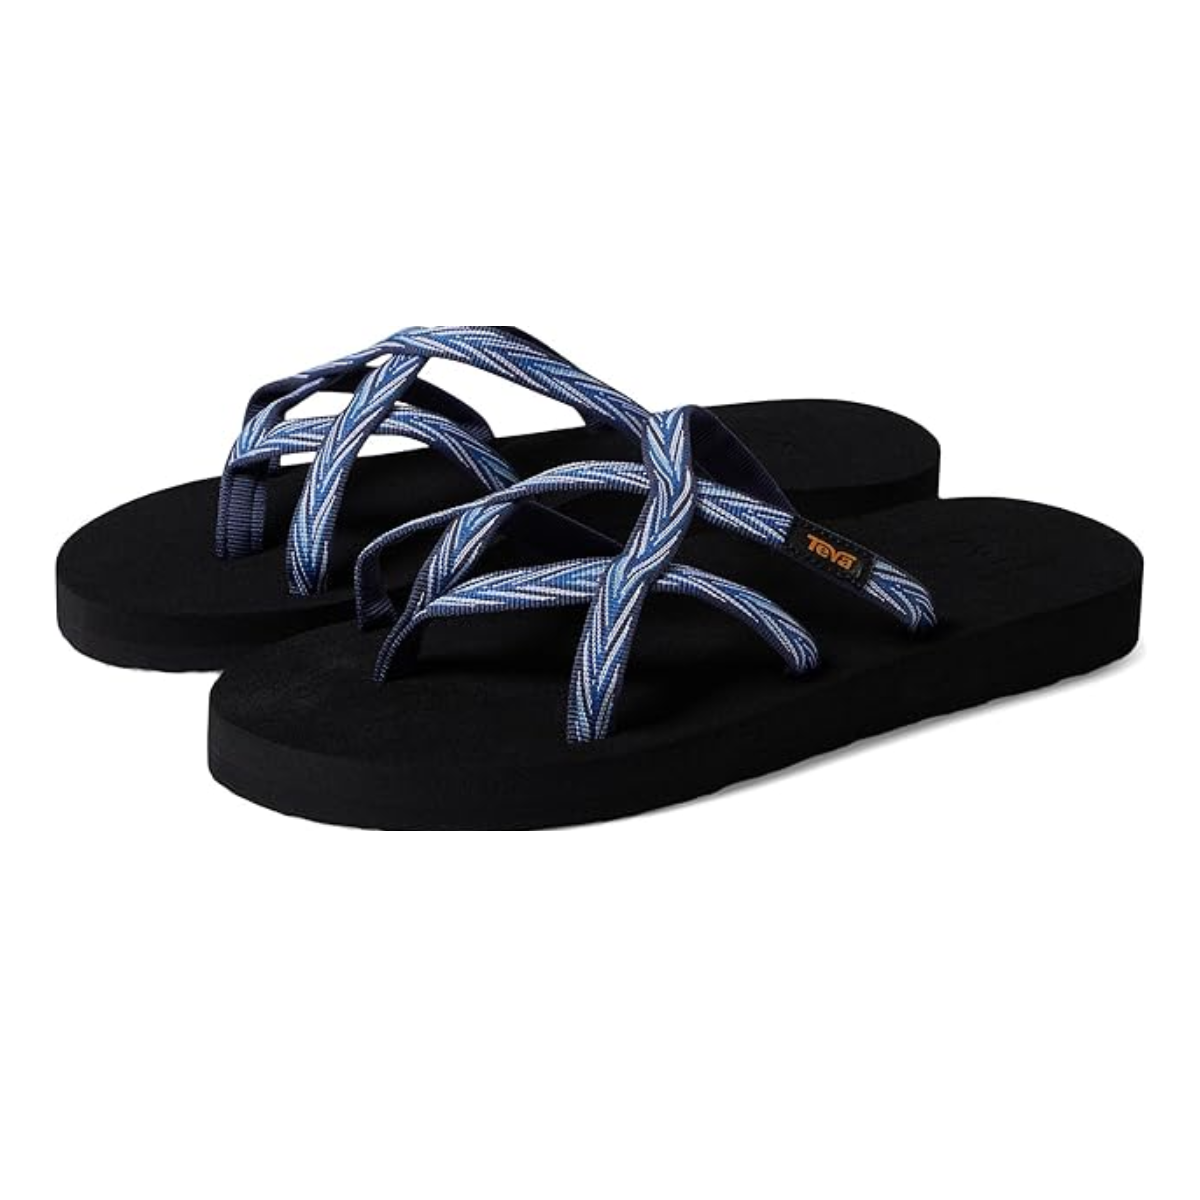 A pair of Olowahu Strappy flip-flops in Palms Indigo Blue by TEVA made with Quick-dry webbing.